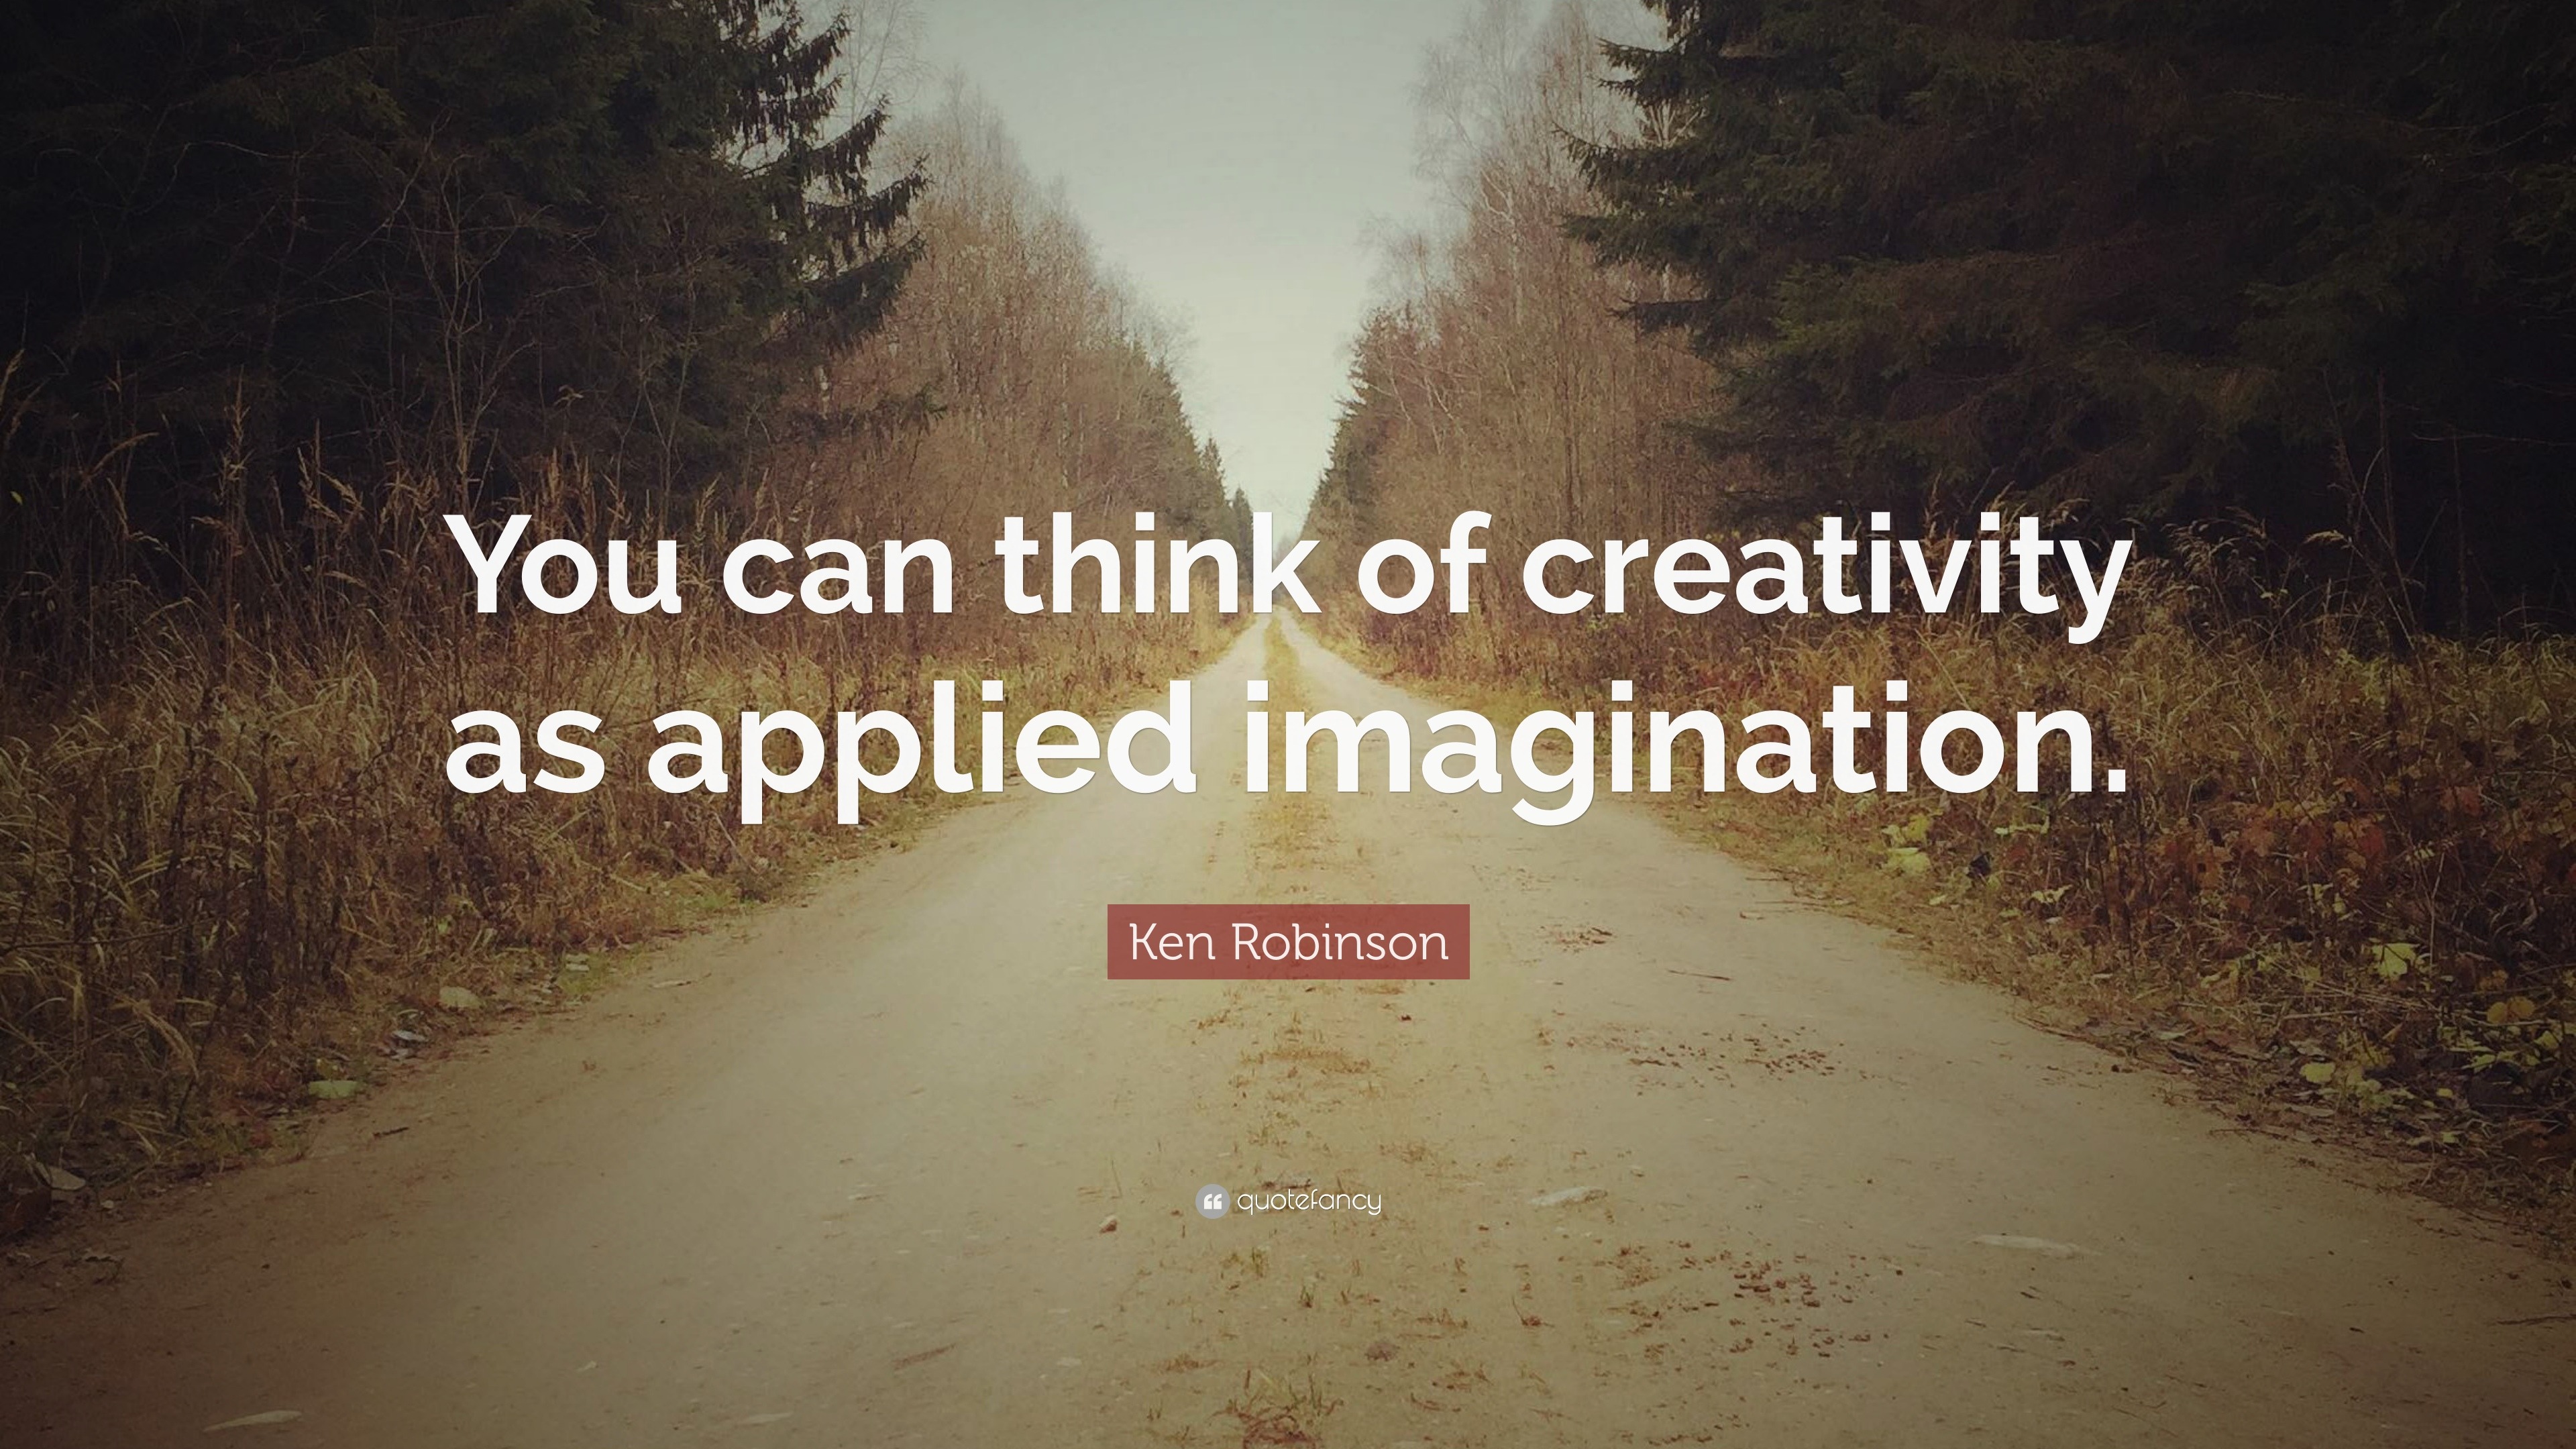 Ken Robinson Quote: “You can think of creativity as applied imagination.”